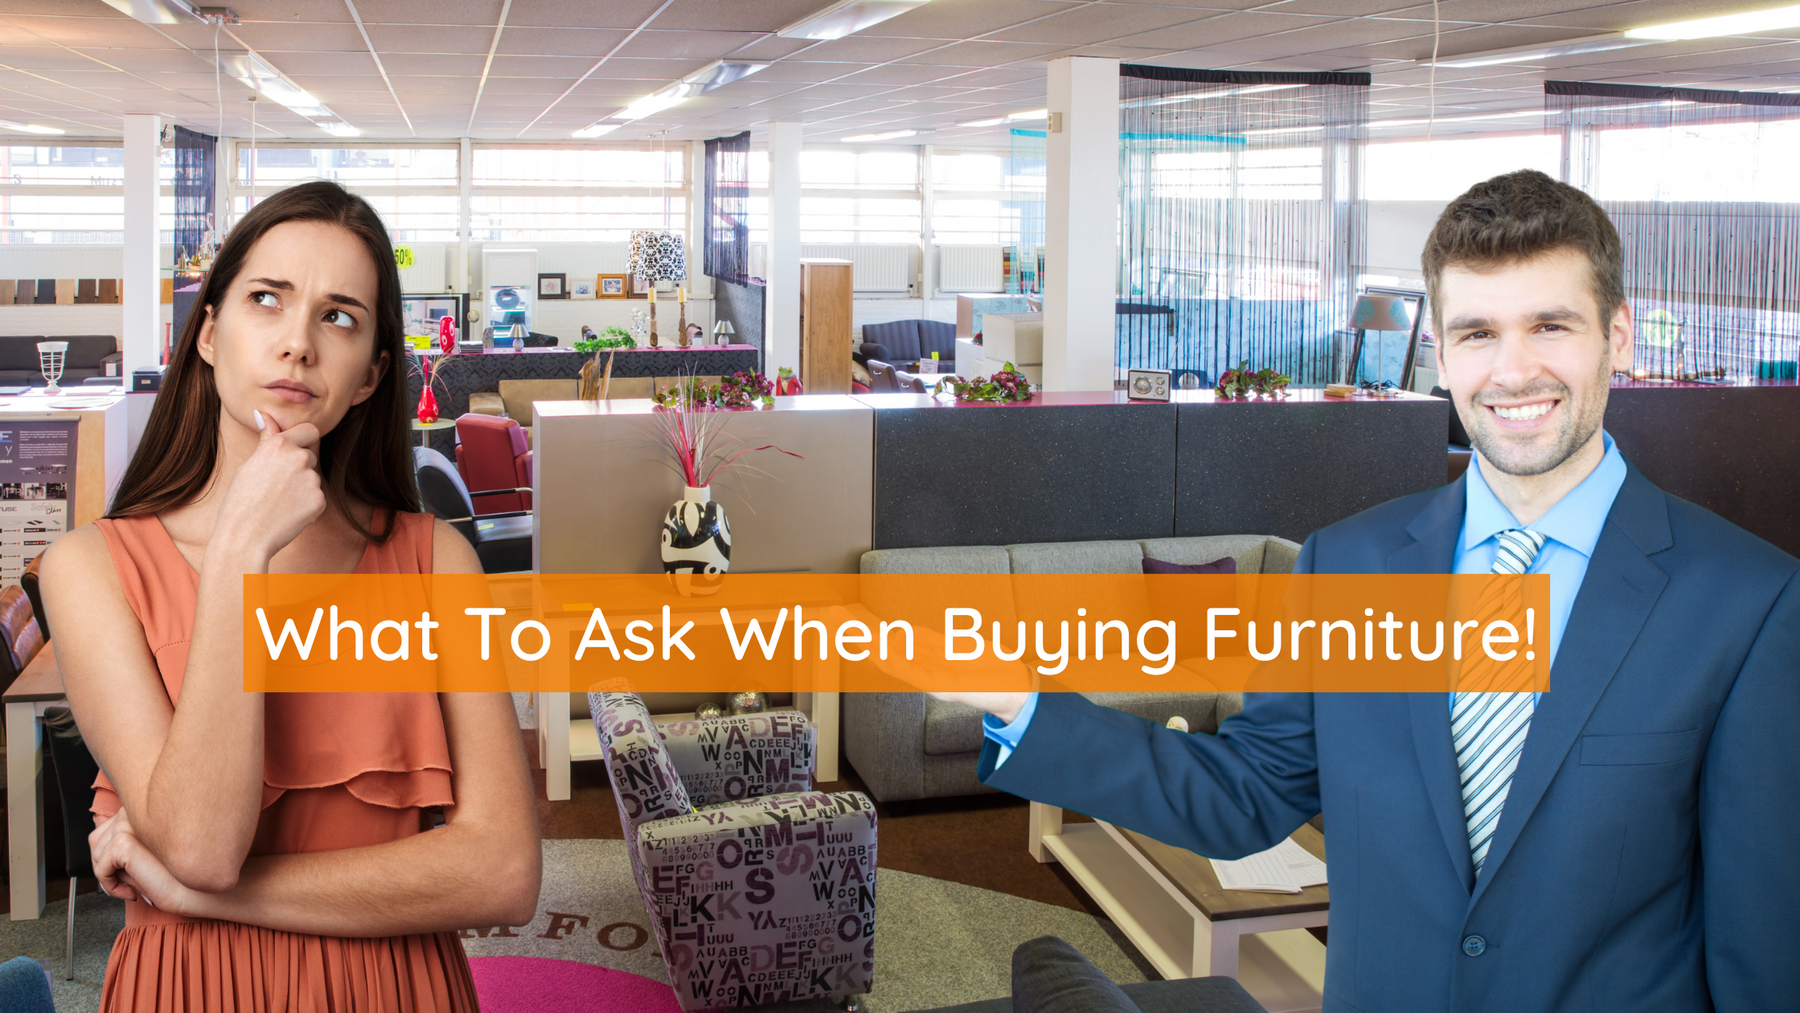 What To Ask When Buying Furniture! - Mainland furniture NZ